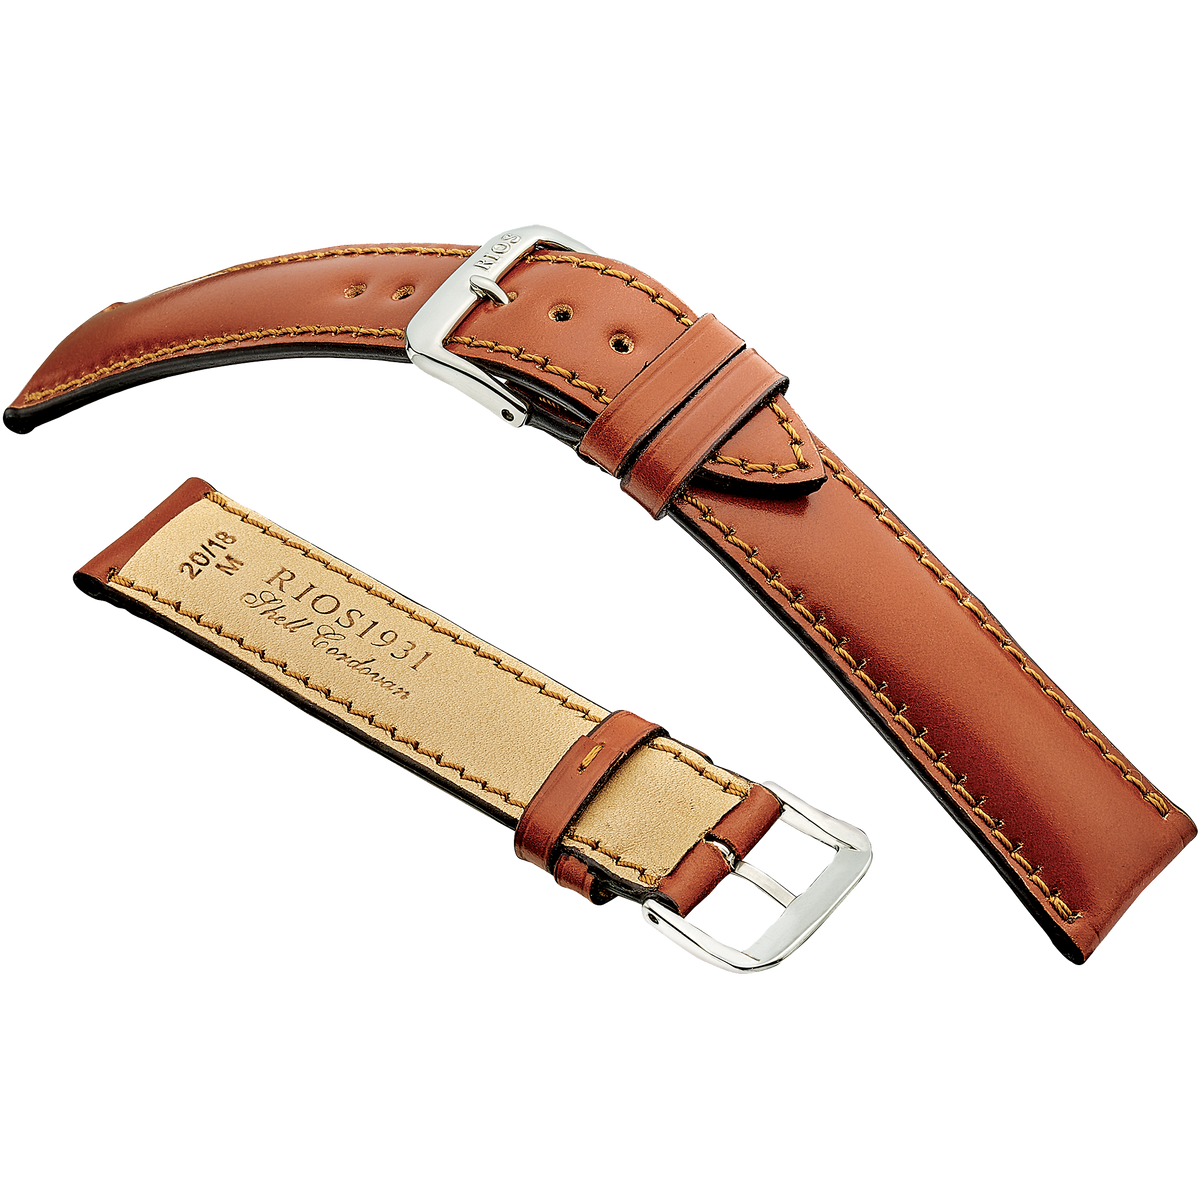 Rios 1931 Watch Bands - Chicago - Genuine Shell Cordovan Leather